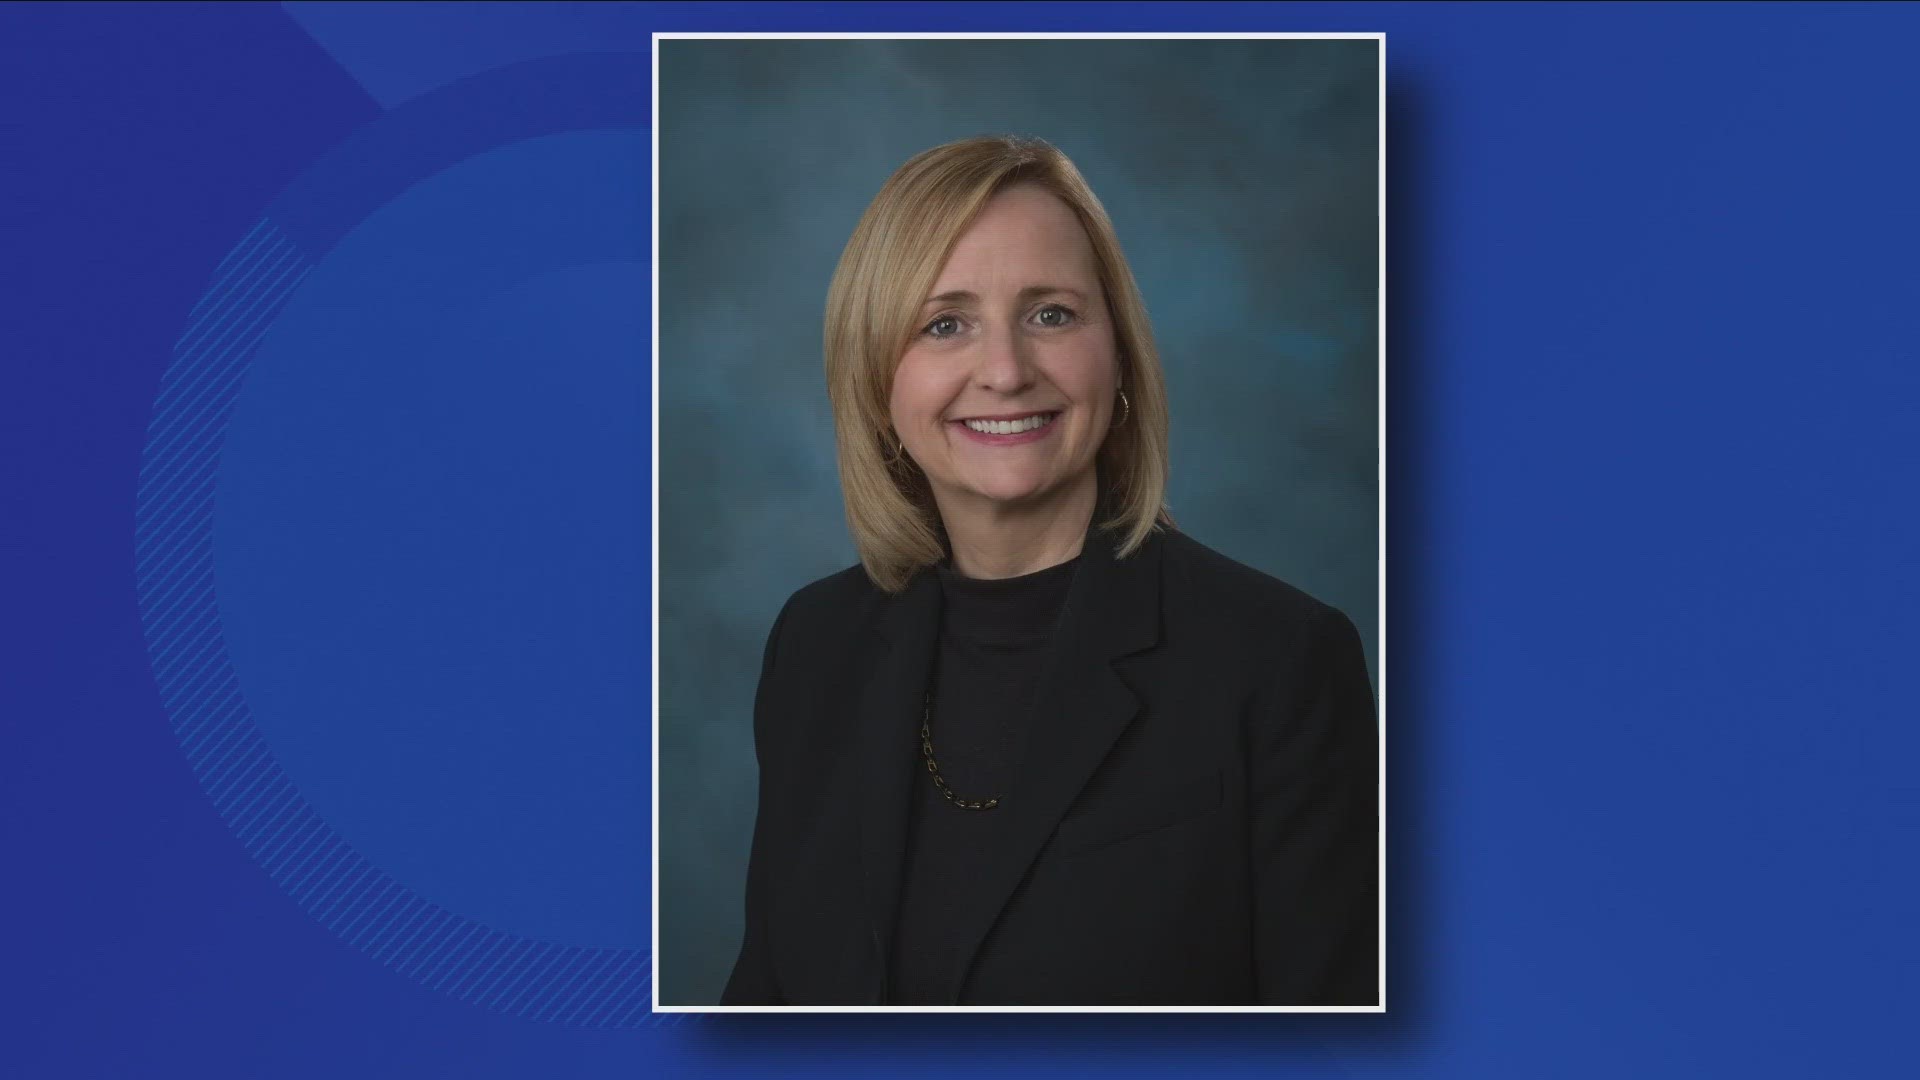 Catholic Health names Joyce Markiewicz who most recently served as Executive Vice President & Chief Business Development Officer.